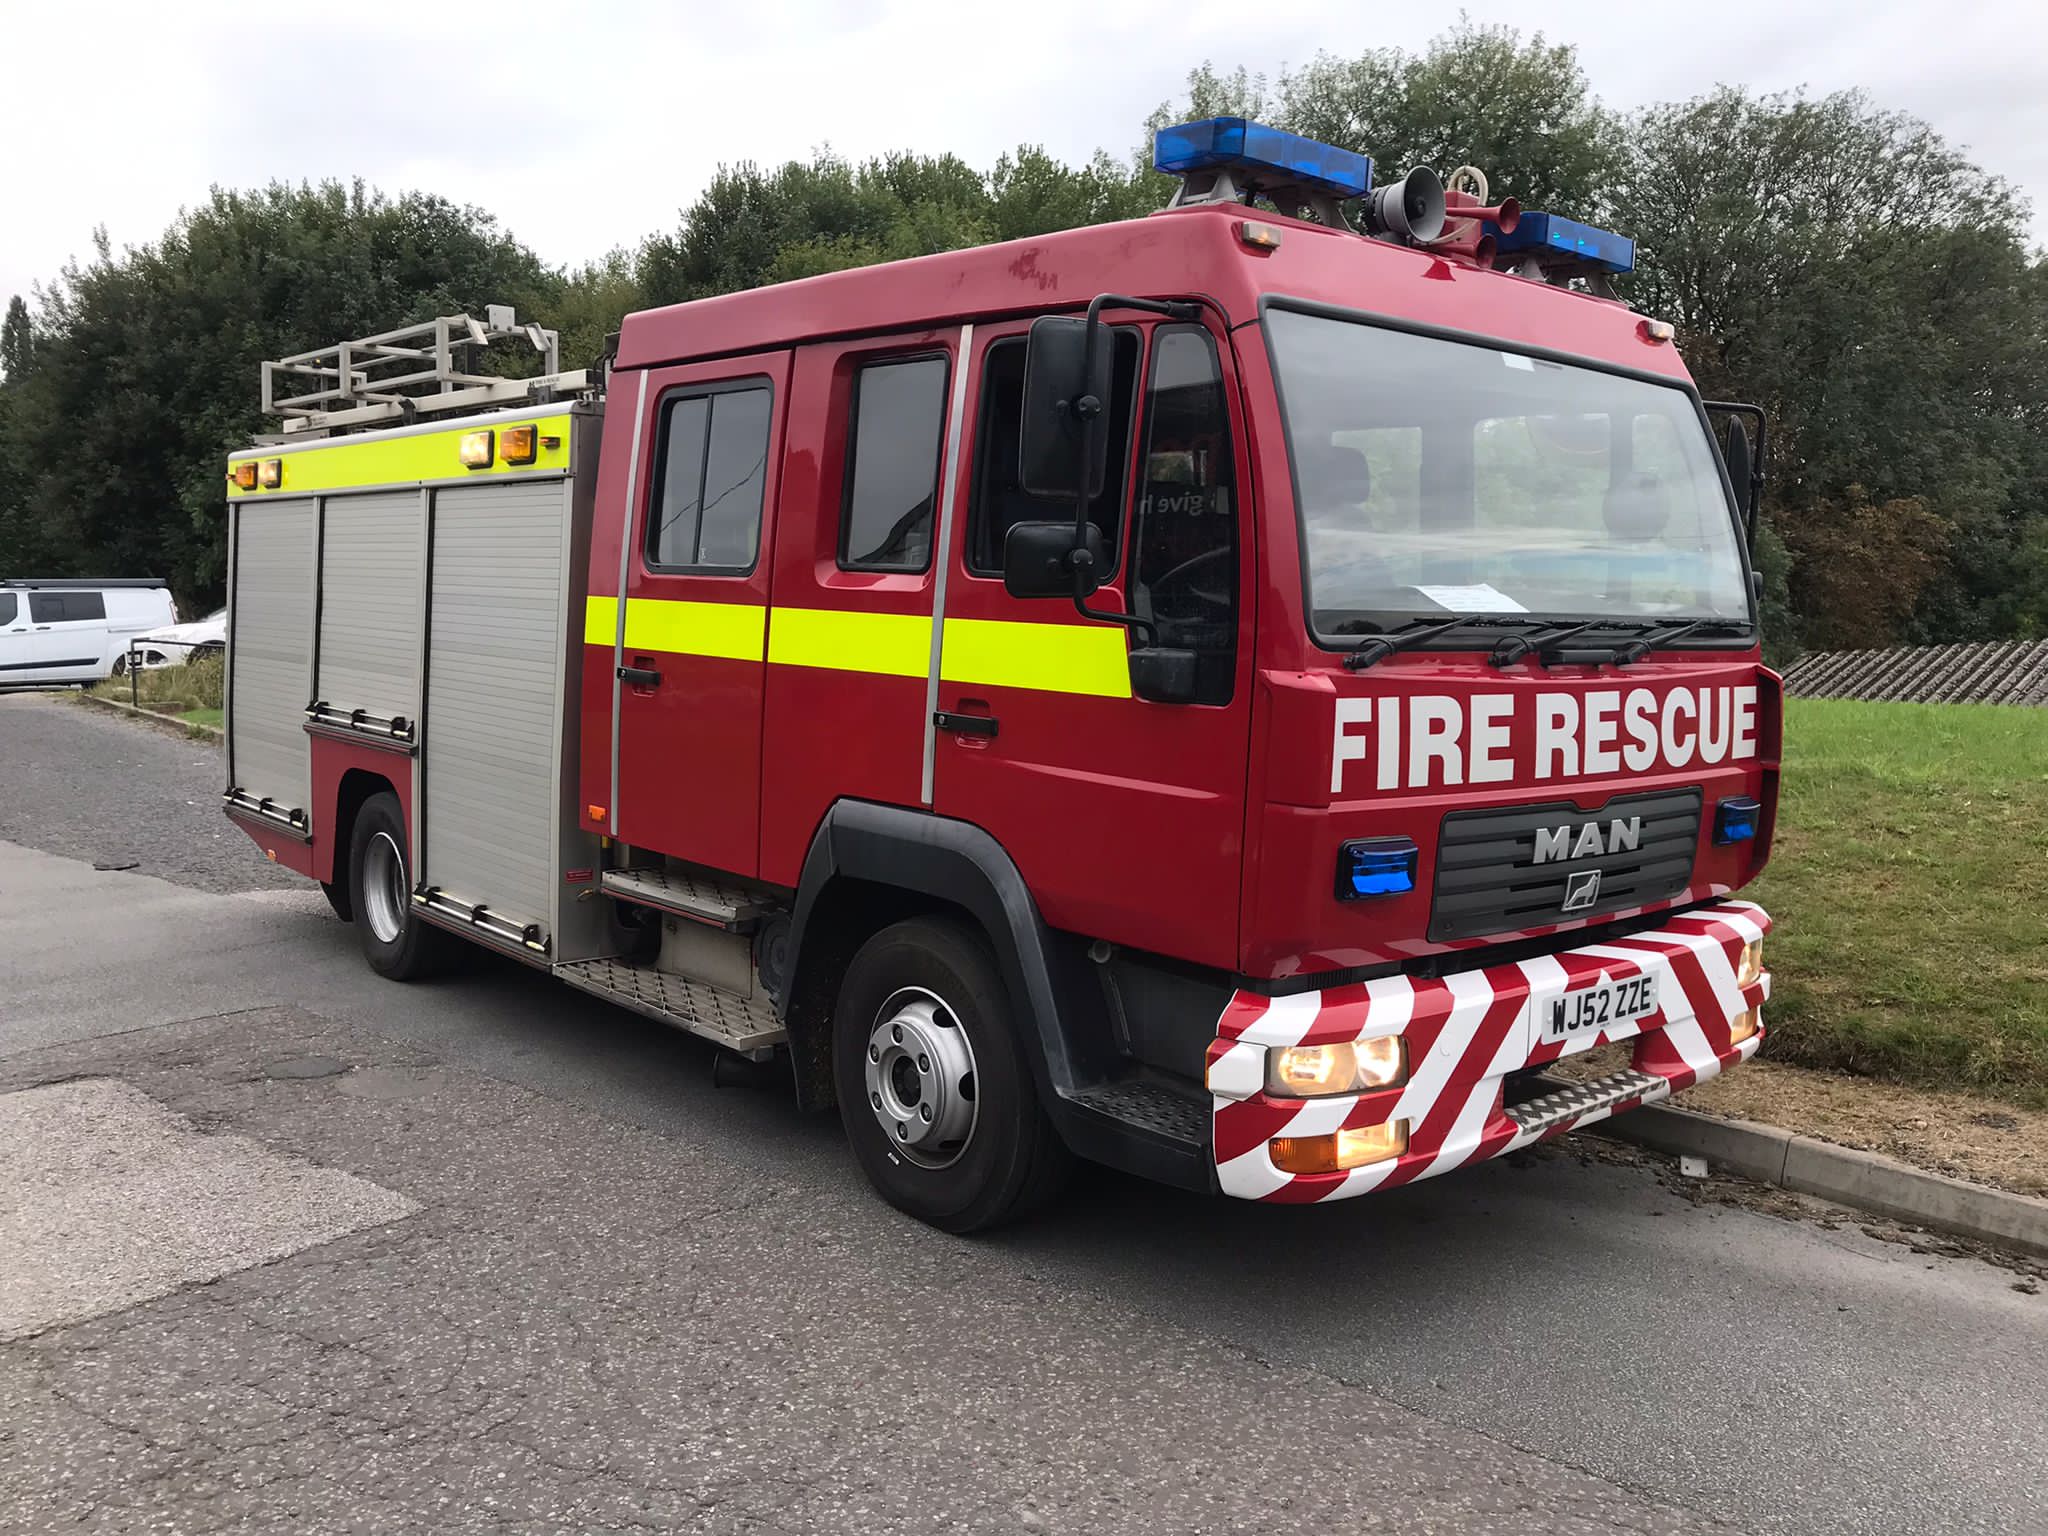 Evems.com - Fire Engines for Sale - <a href='/index.php/test/251-man-wtl' title='Read more...' class='joodb_titletink'>MAN WtL</a>